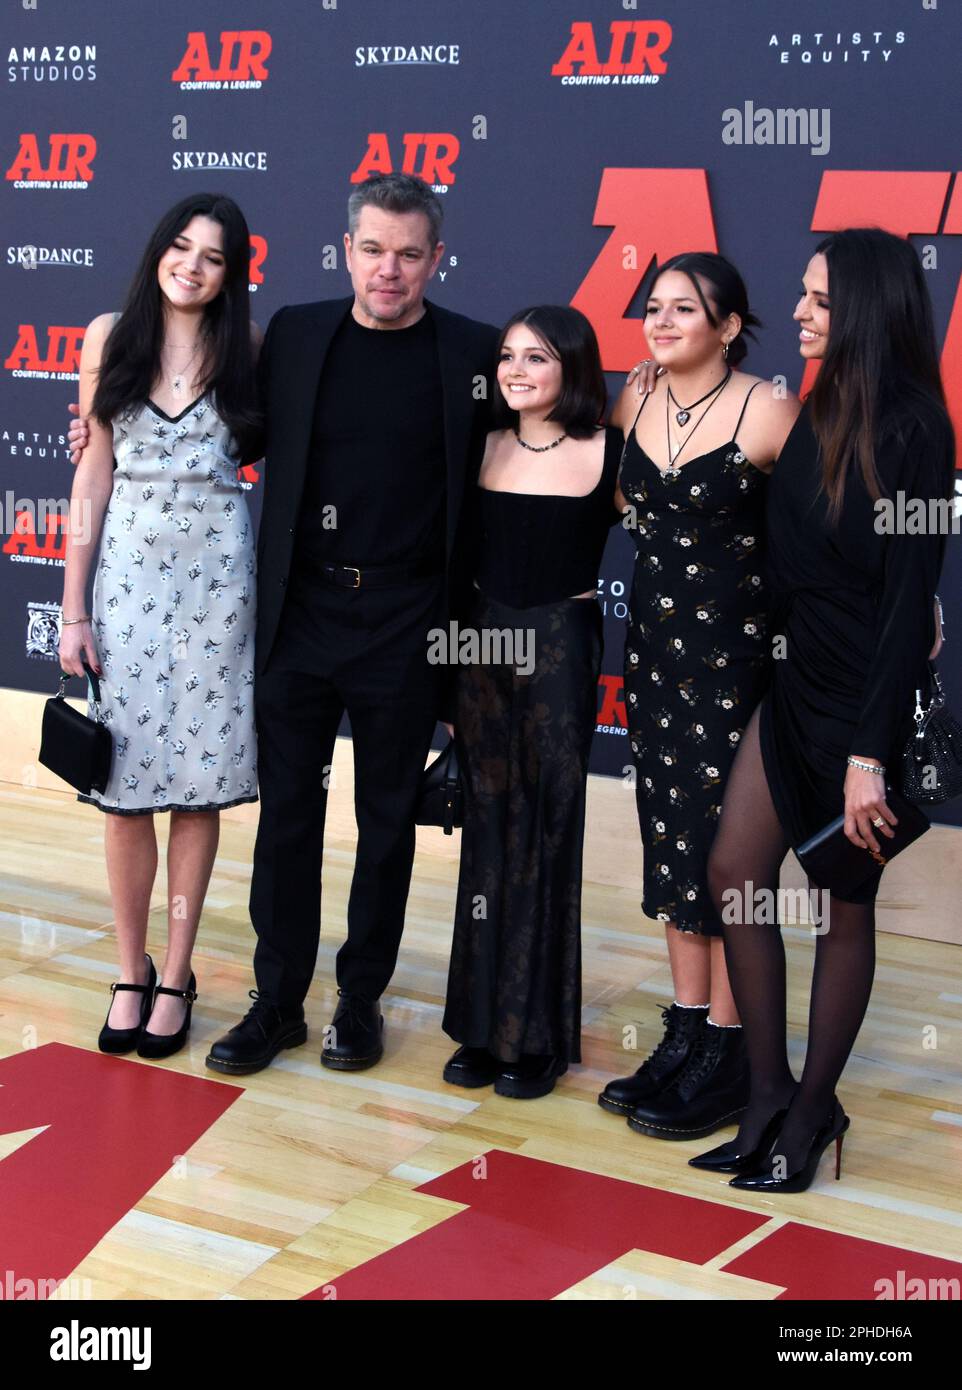 Los Angeles, California, USA 27th March 2023 Actor Matt Damon, wife Luciana Barroso and family attend Amazon Studios' World Premiere of 'AIR' at Regency Village Theatre on March 27, 2023 in Los Angeles, California, USA. Photo by Barry King/Alamy Live News Stock Photo